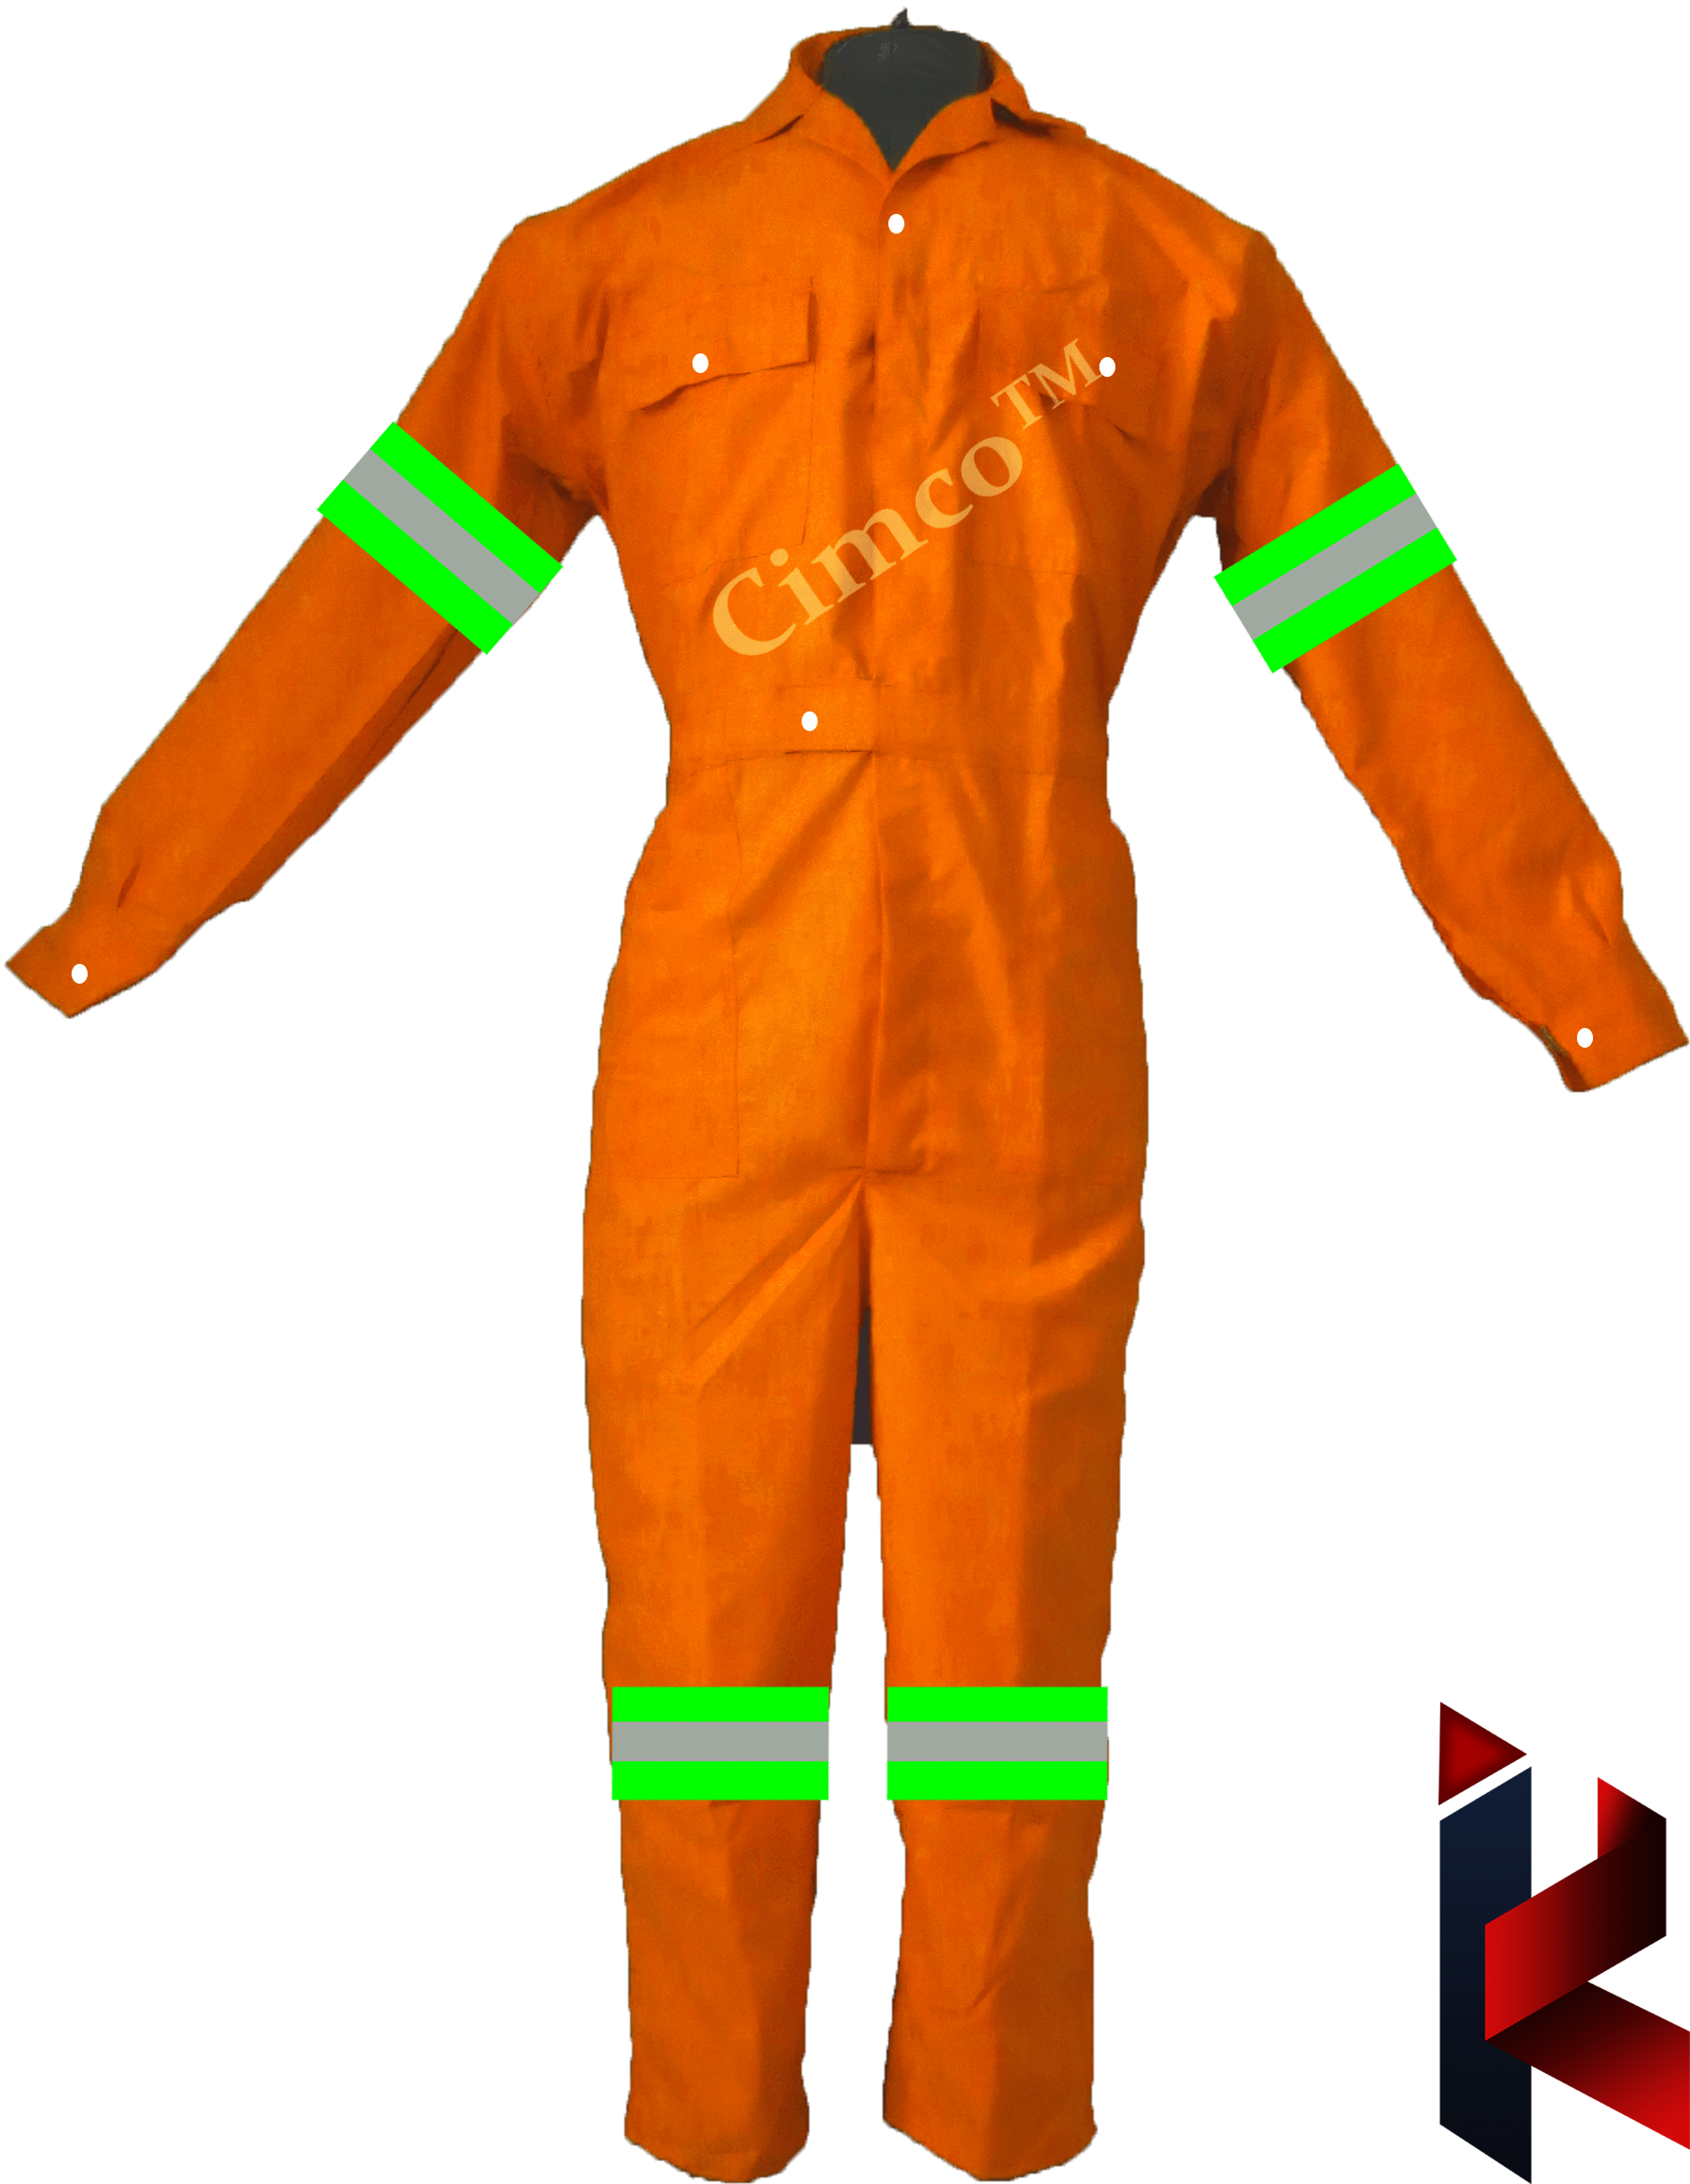 CIMCO | BOILERSUIT® 5411 IFR OR with Test Certificate